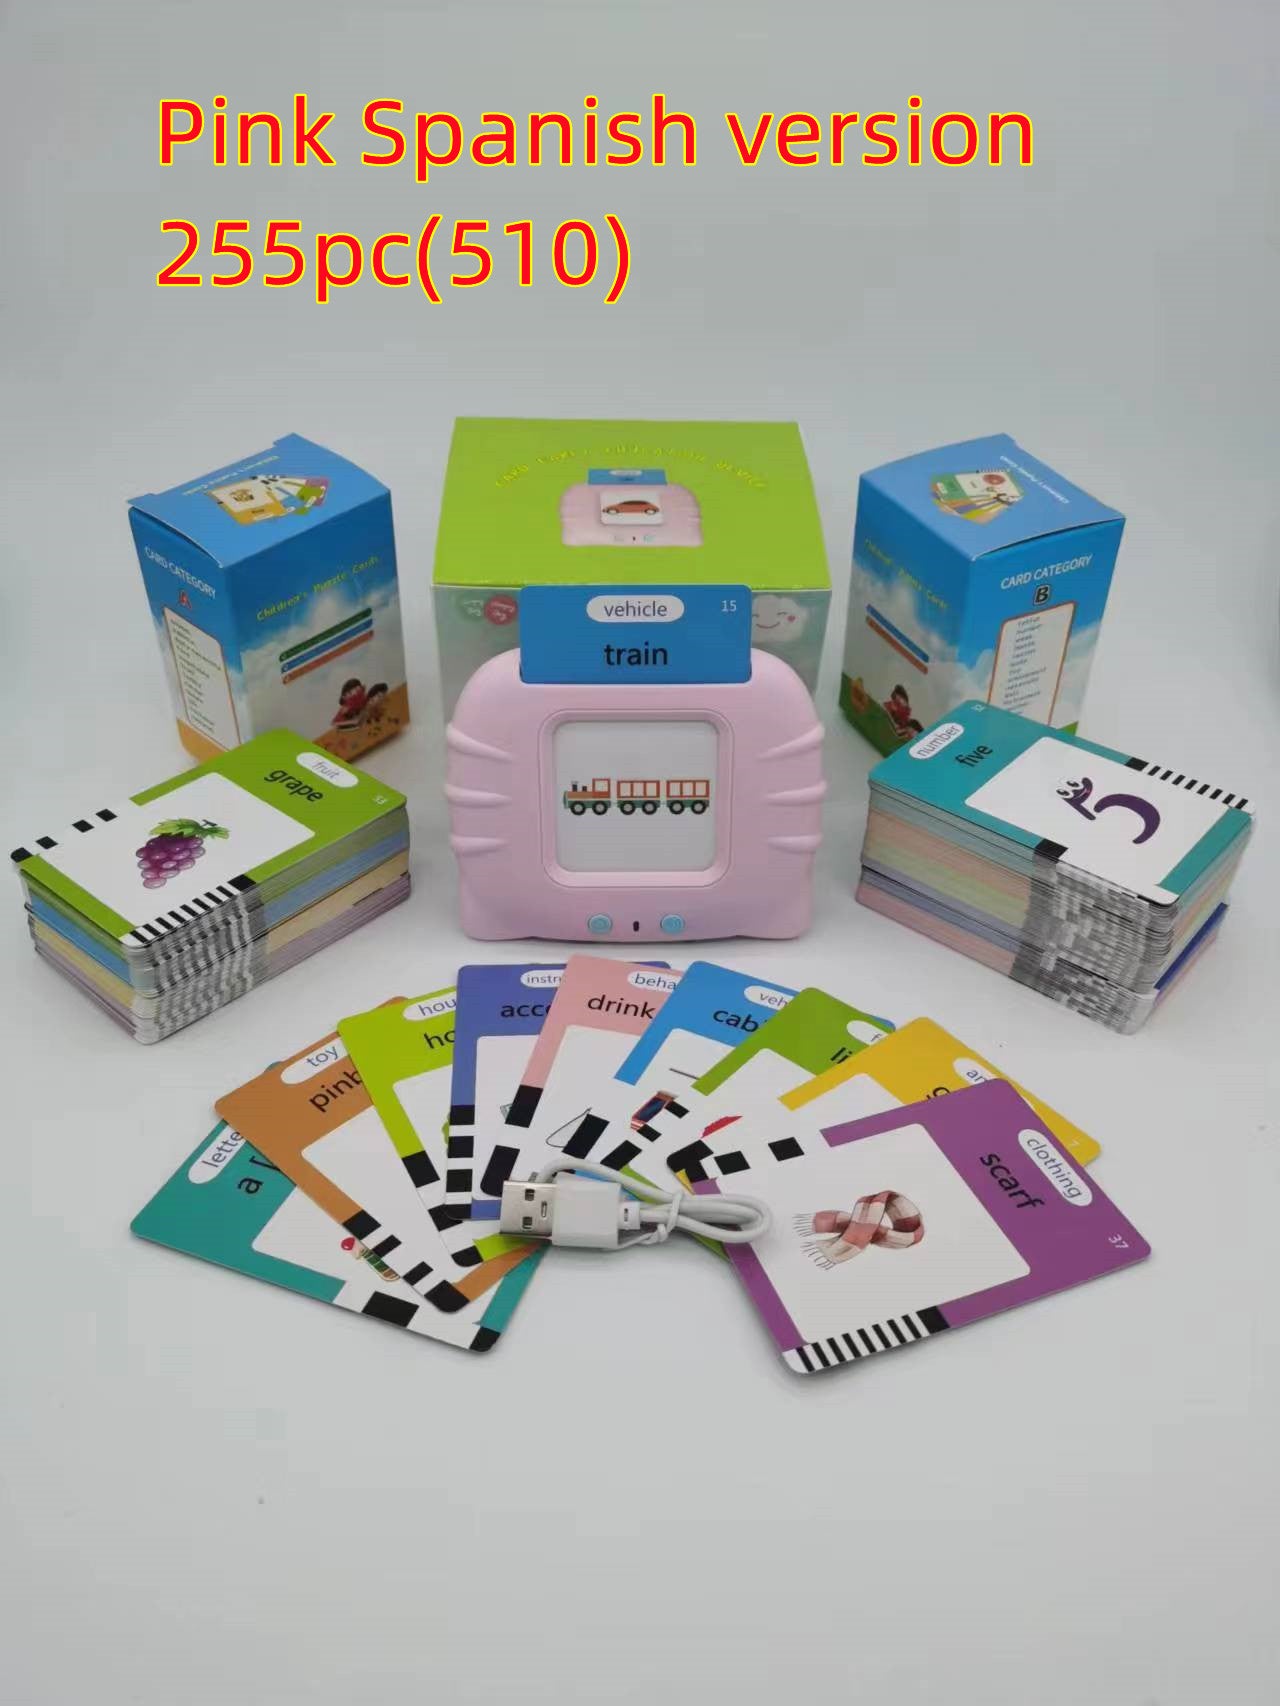 Card Early Education Children's Enlightenment English Learning Machine